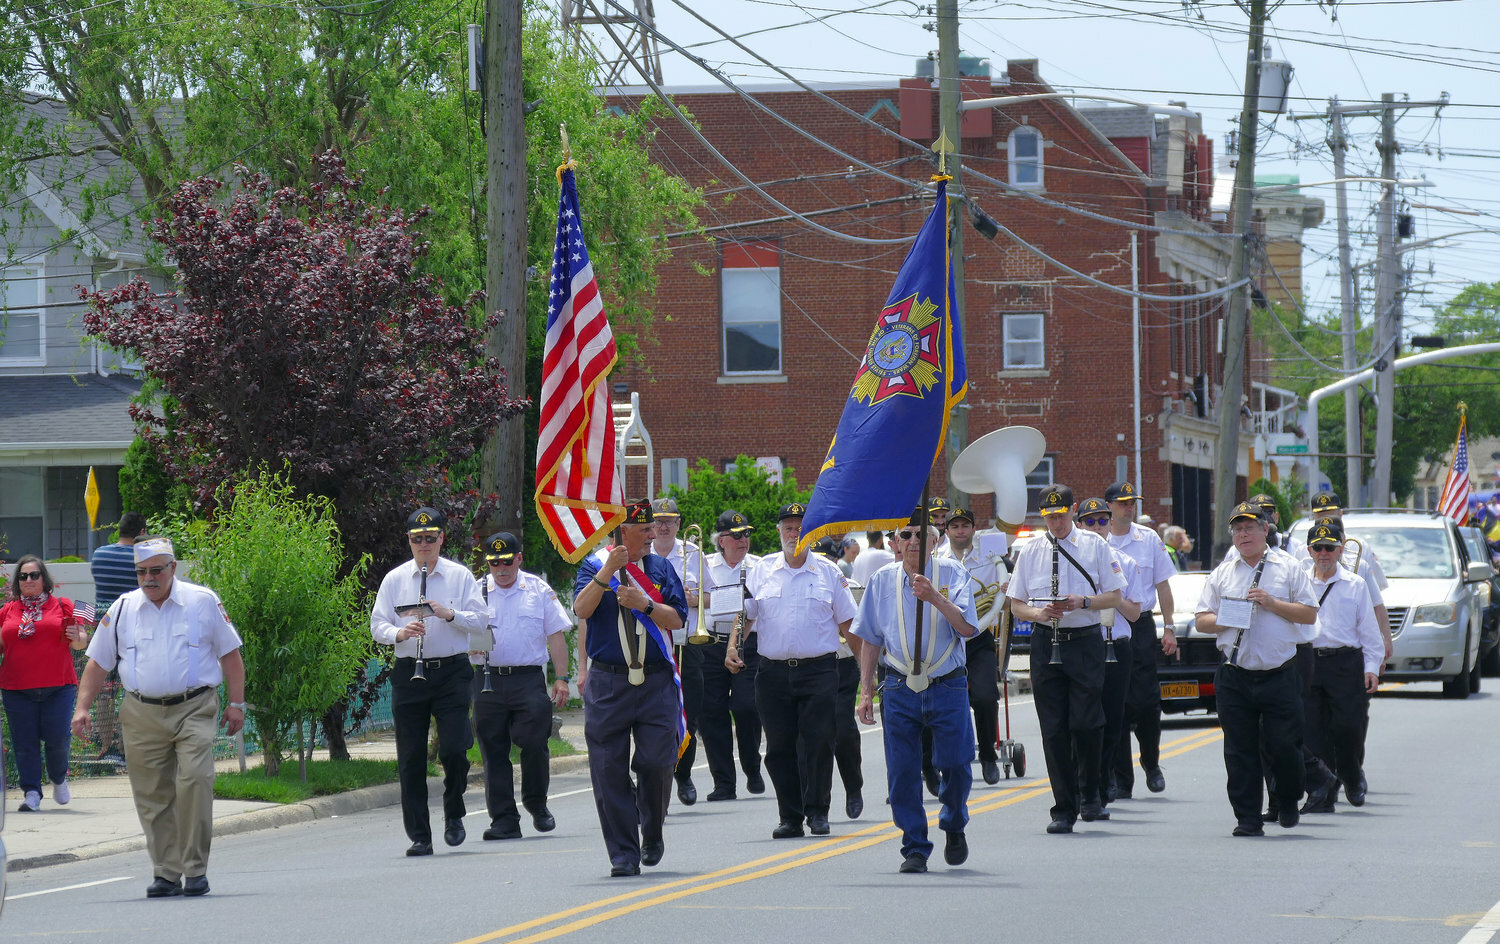 Last years Memorial Day saw Military veterans from the Veterans of Foreign Wars Post 1582 parade up Doughty Boulevard.